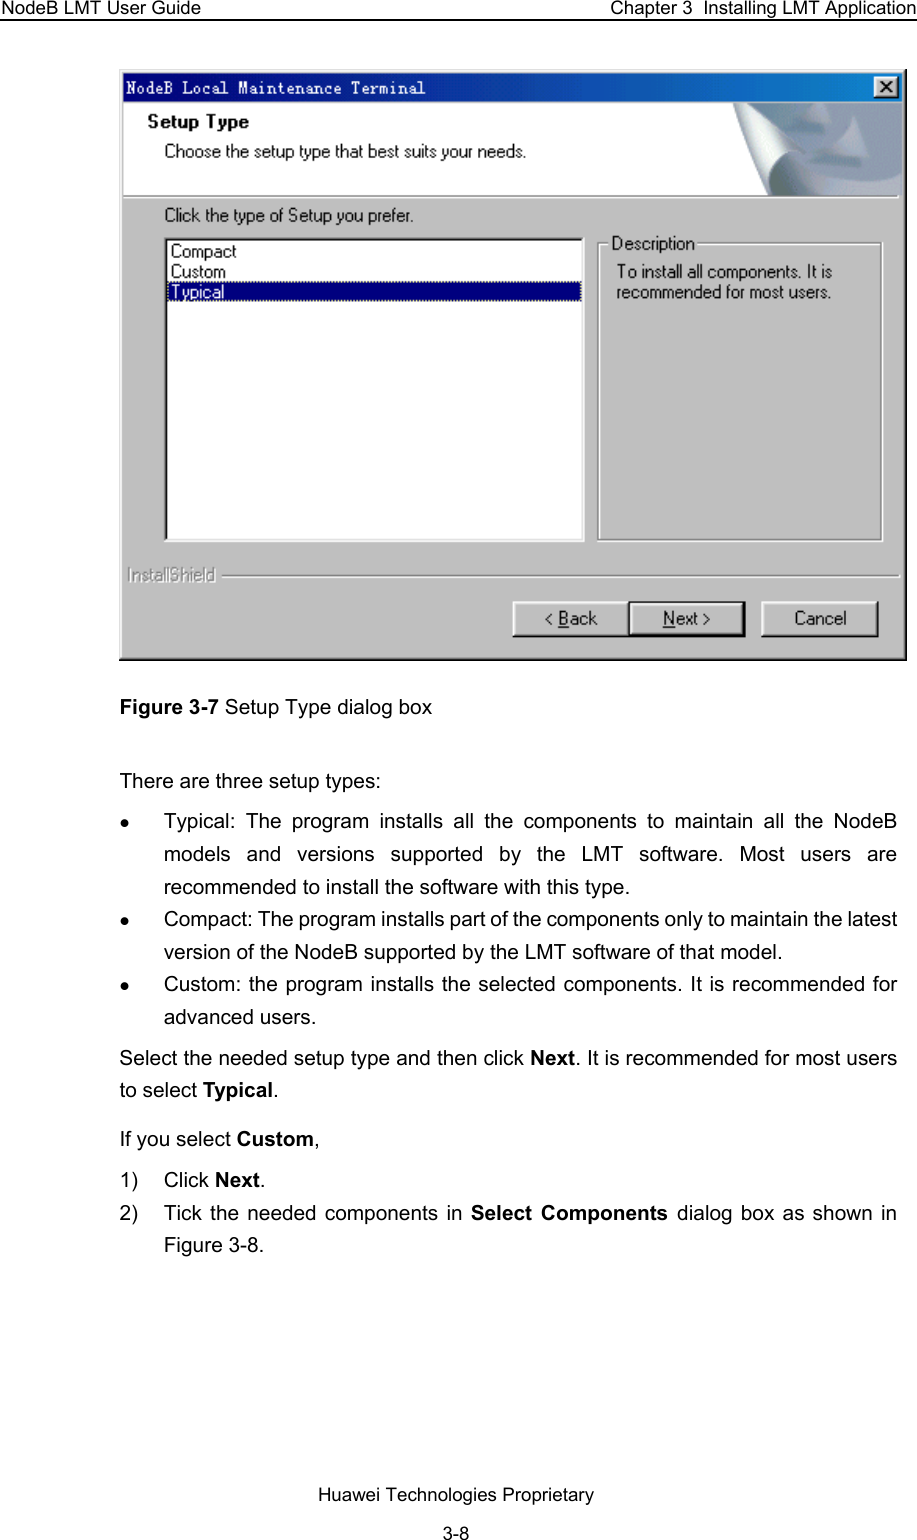 NodeB LMT User Guide  Chapter 3  Installing LMT Application  Figure 3-7 Setup Type dialog box  There are three setup types:  z Typical: The program installs all the components to maintain all the NodeB models and versions supported by the LMT software. Most users are recommended to install the software with this type.  z Compact: The program installs part of the components only to maintain the latest version of the NodeB supported by the LMT software of that model.  z Custom: the program installs the selected components. It is recommended for advanced users.  Select the needed setup type and then click Next. It is recommended for most users to select Typical.  If you select Custom,  1) Click Next.  2)  Tick the needed components in Select Components dialog box as shown in Figure 3-8. Huawei Technologies Proprietary 3-8 